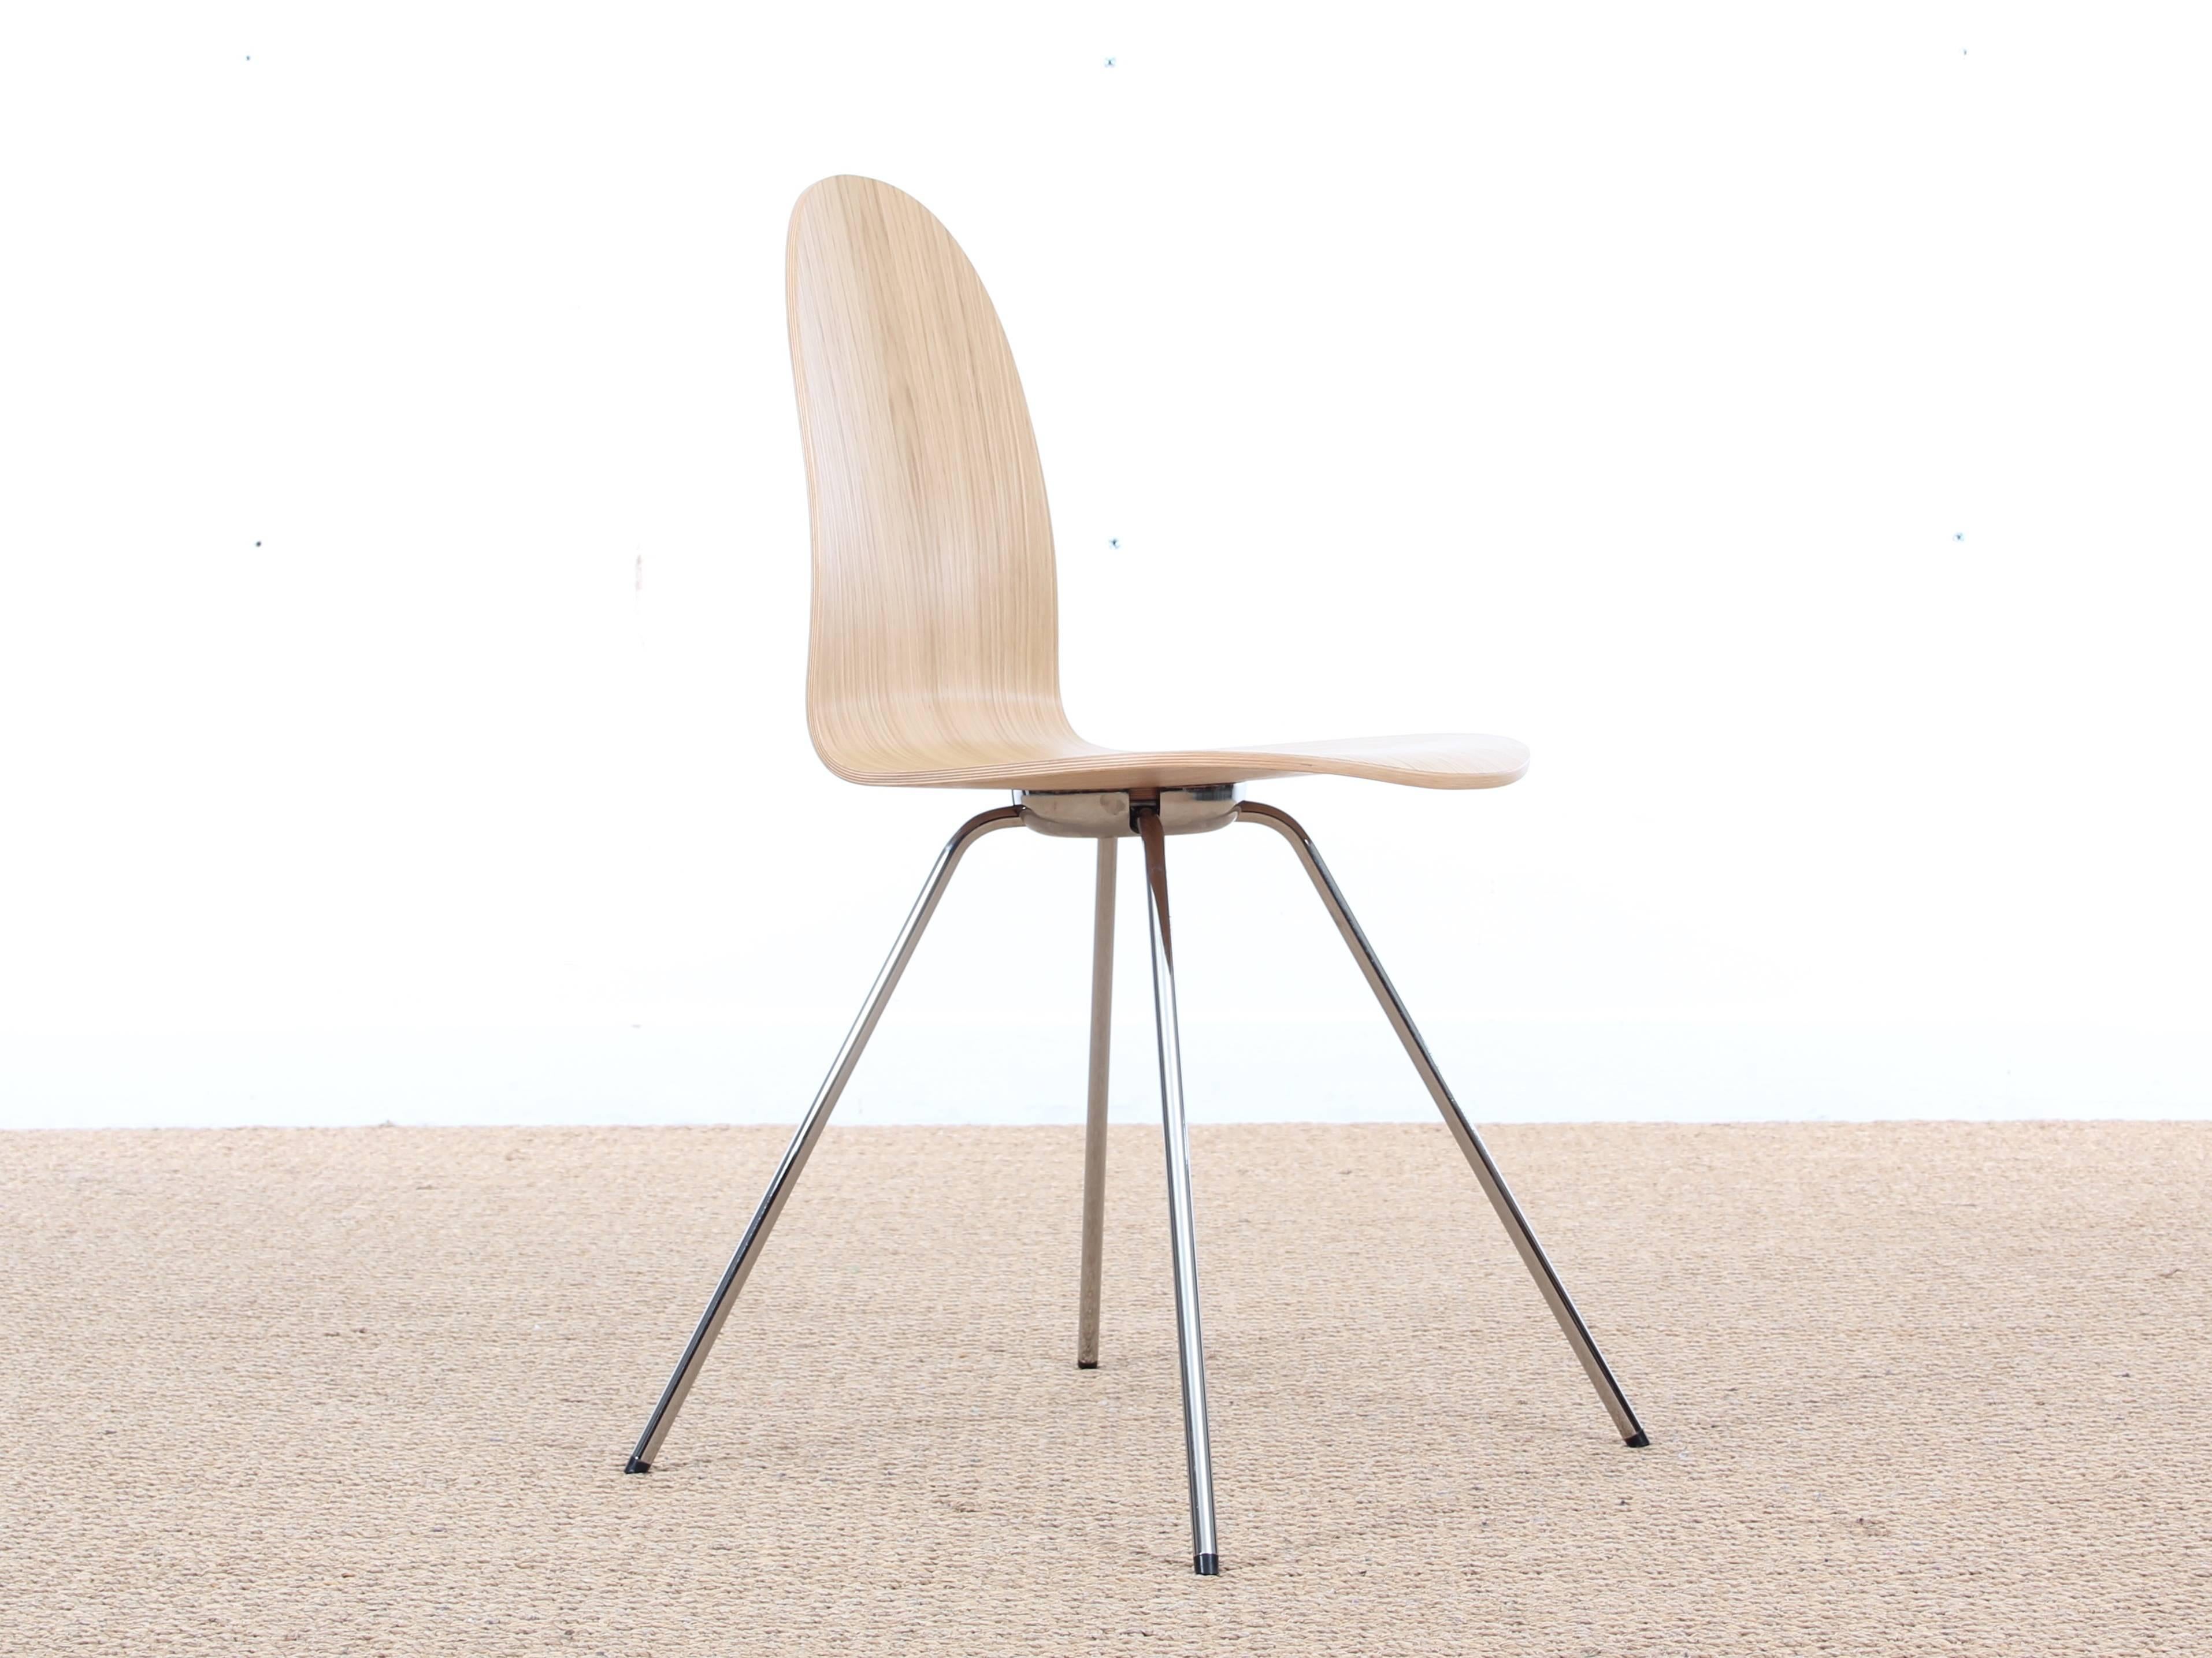 

The tongue chair is classic Arne Jacobsen. It has the immediately recognizable characteristics of the organic wave form in the seat; complemented with highly sculptural and splayed legs.

We have gone the extra mile for this delightful chair